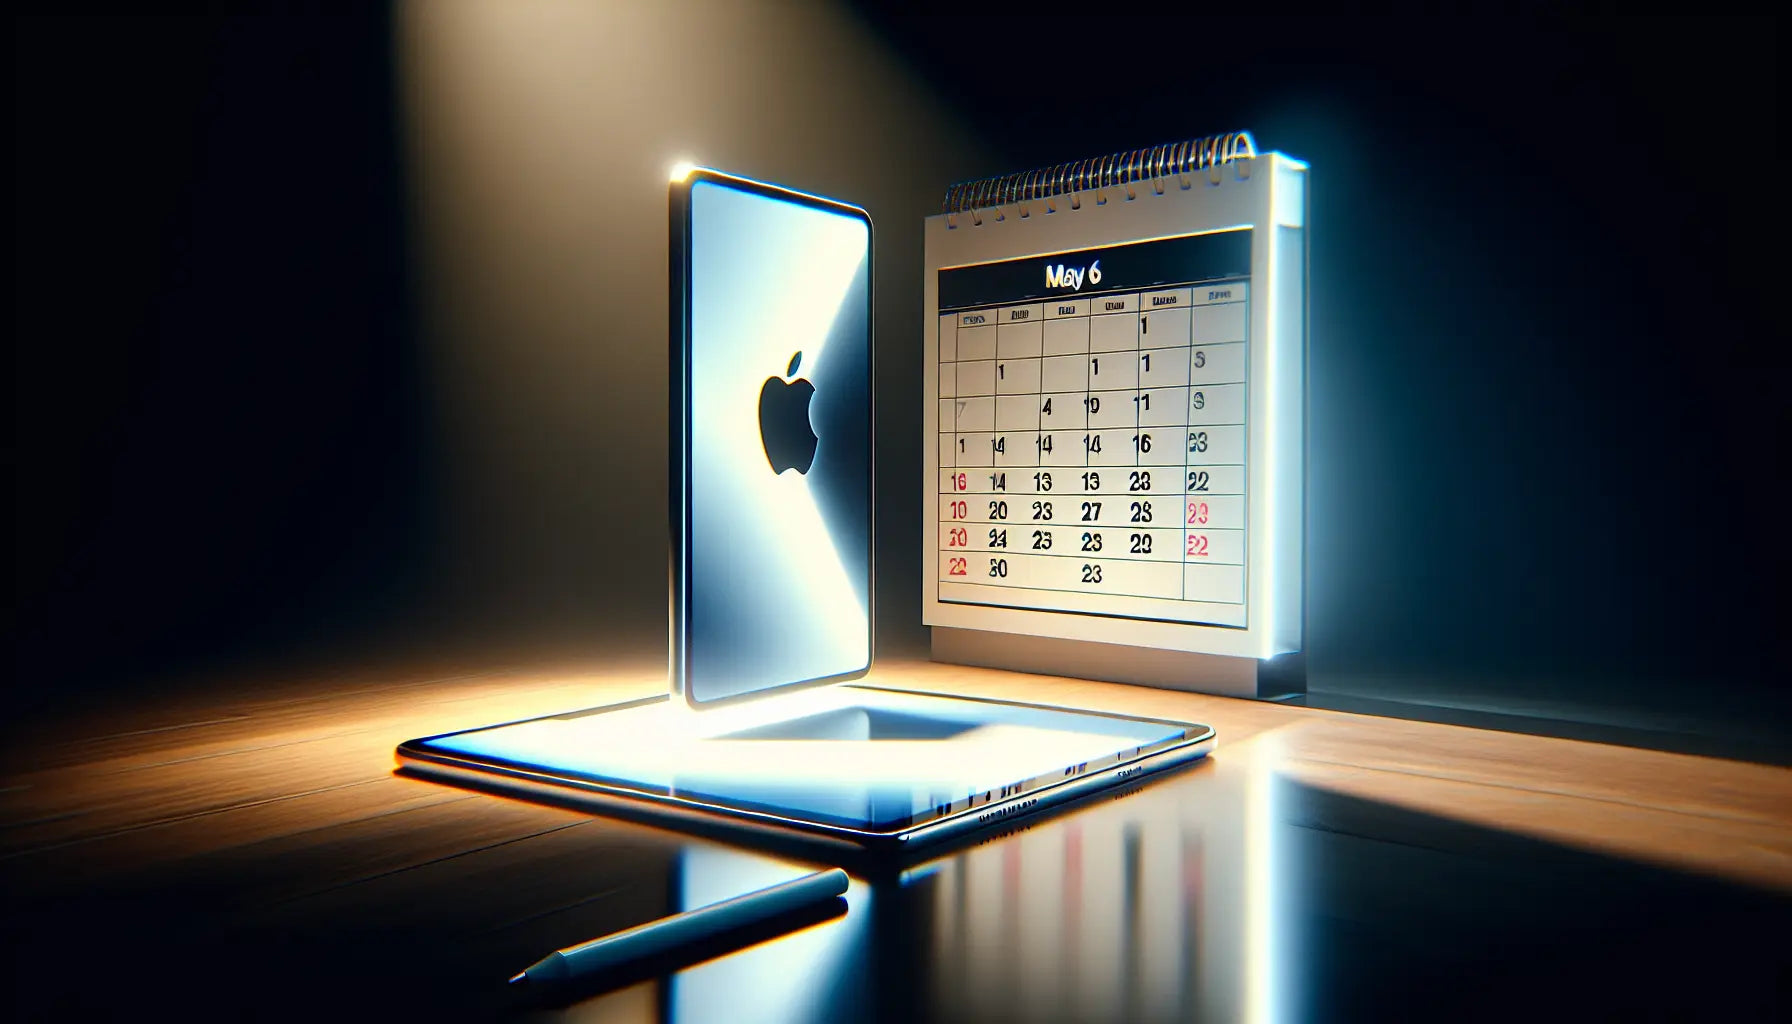 New iPads will ‘probably’ arrive week of May 6, says trusted analyst